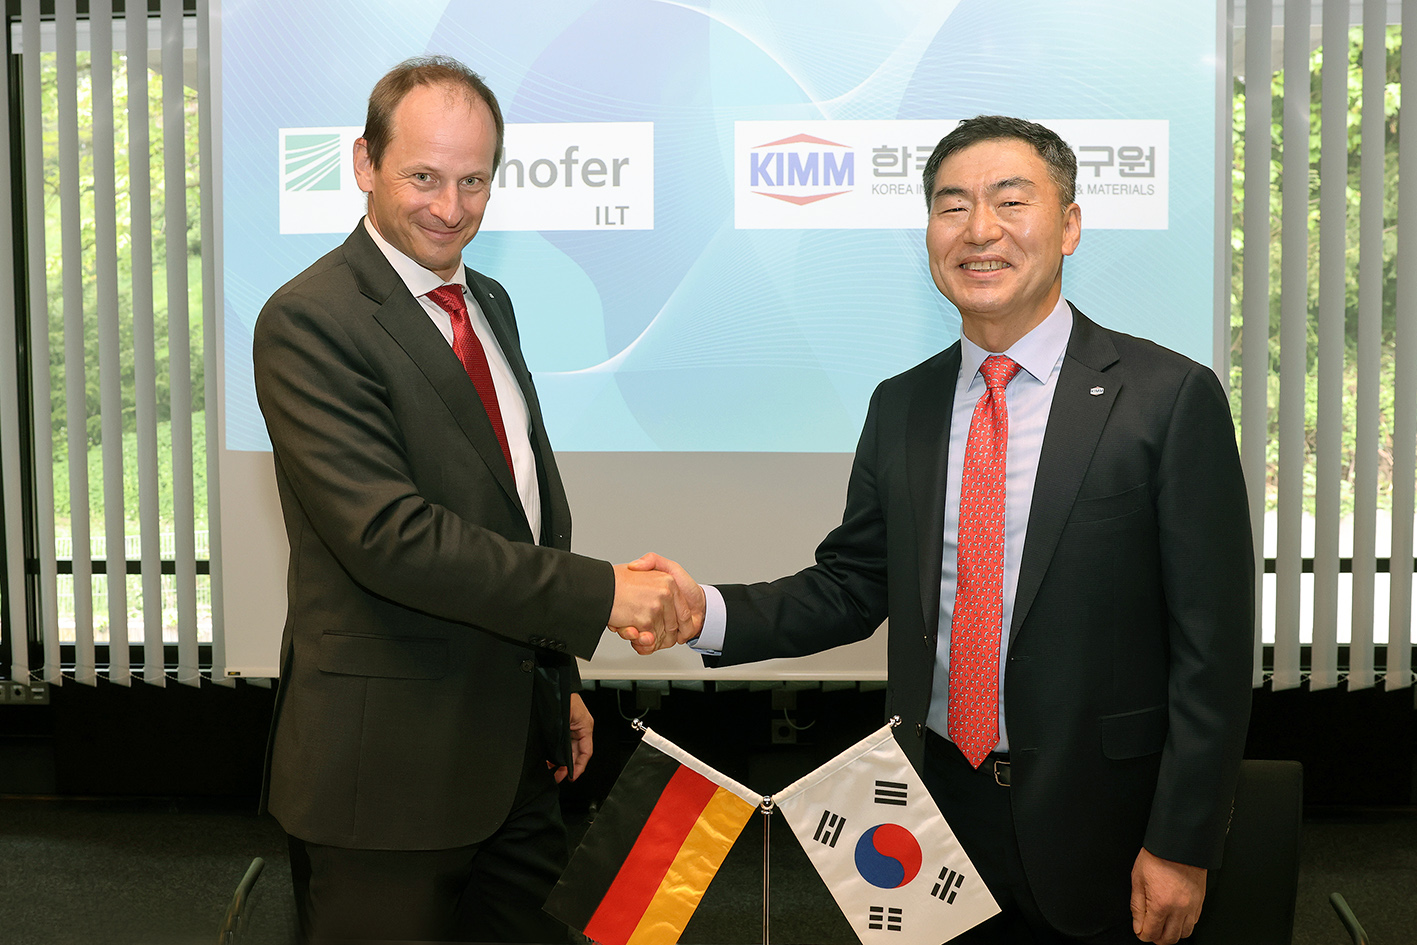 Prof. Dr. Constantin Haefner, Director of Fraunhofer ILT (left) and Dr. Sang Jin Park, President of KIMM, at the signing of the Memorandum of Understanding on May 5, 2022 in Aachen. 